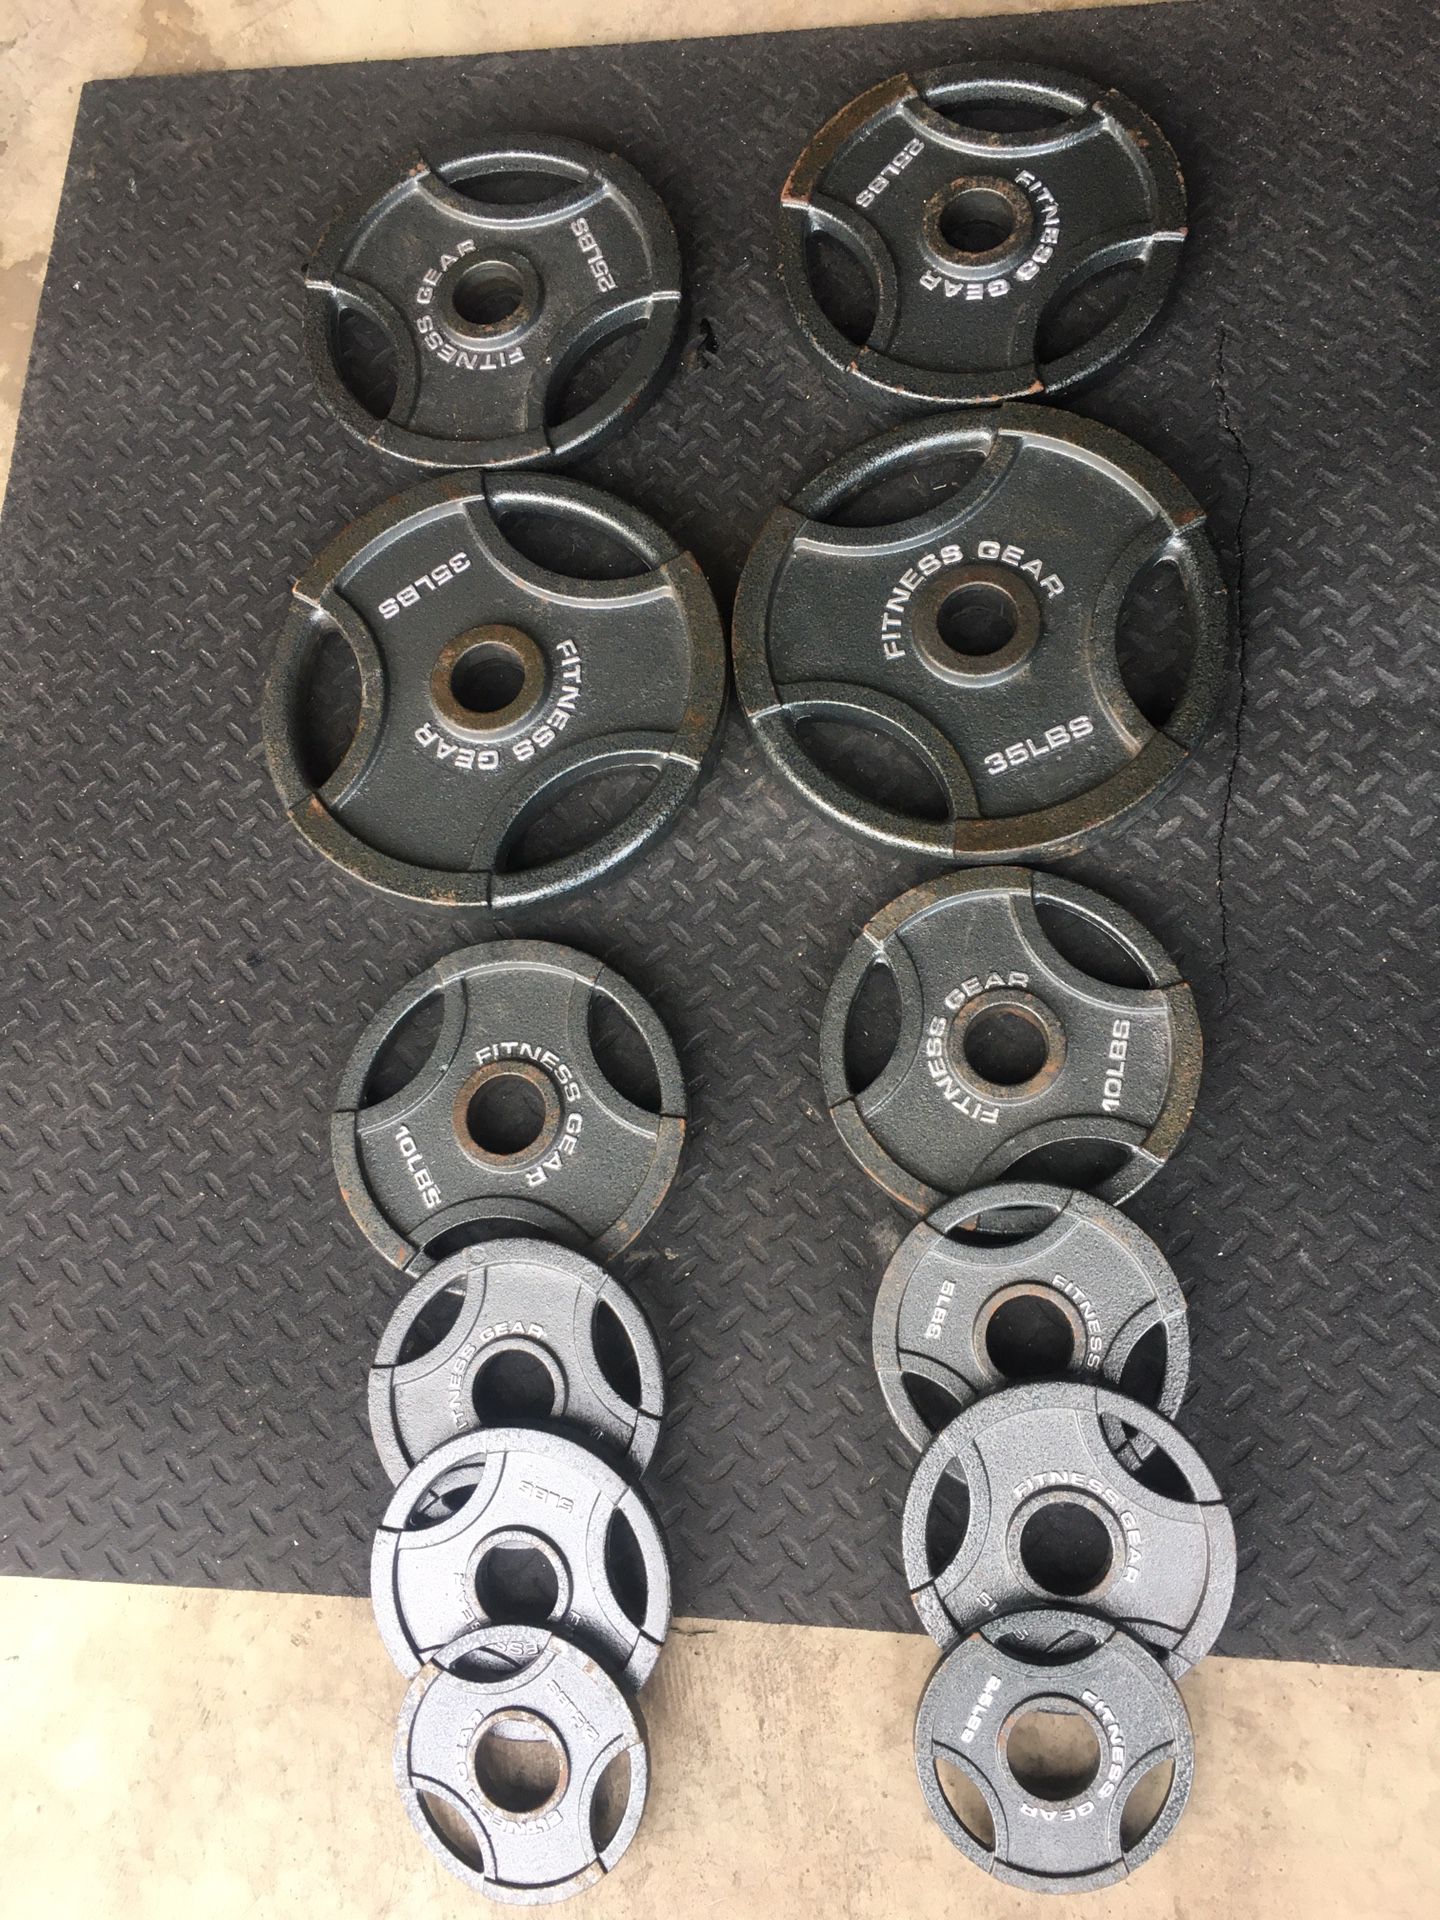 Olympic weight plates 165 pounds